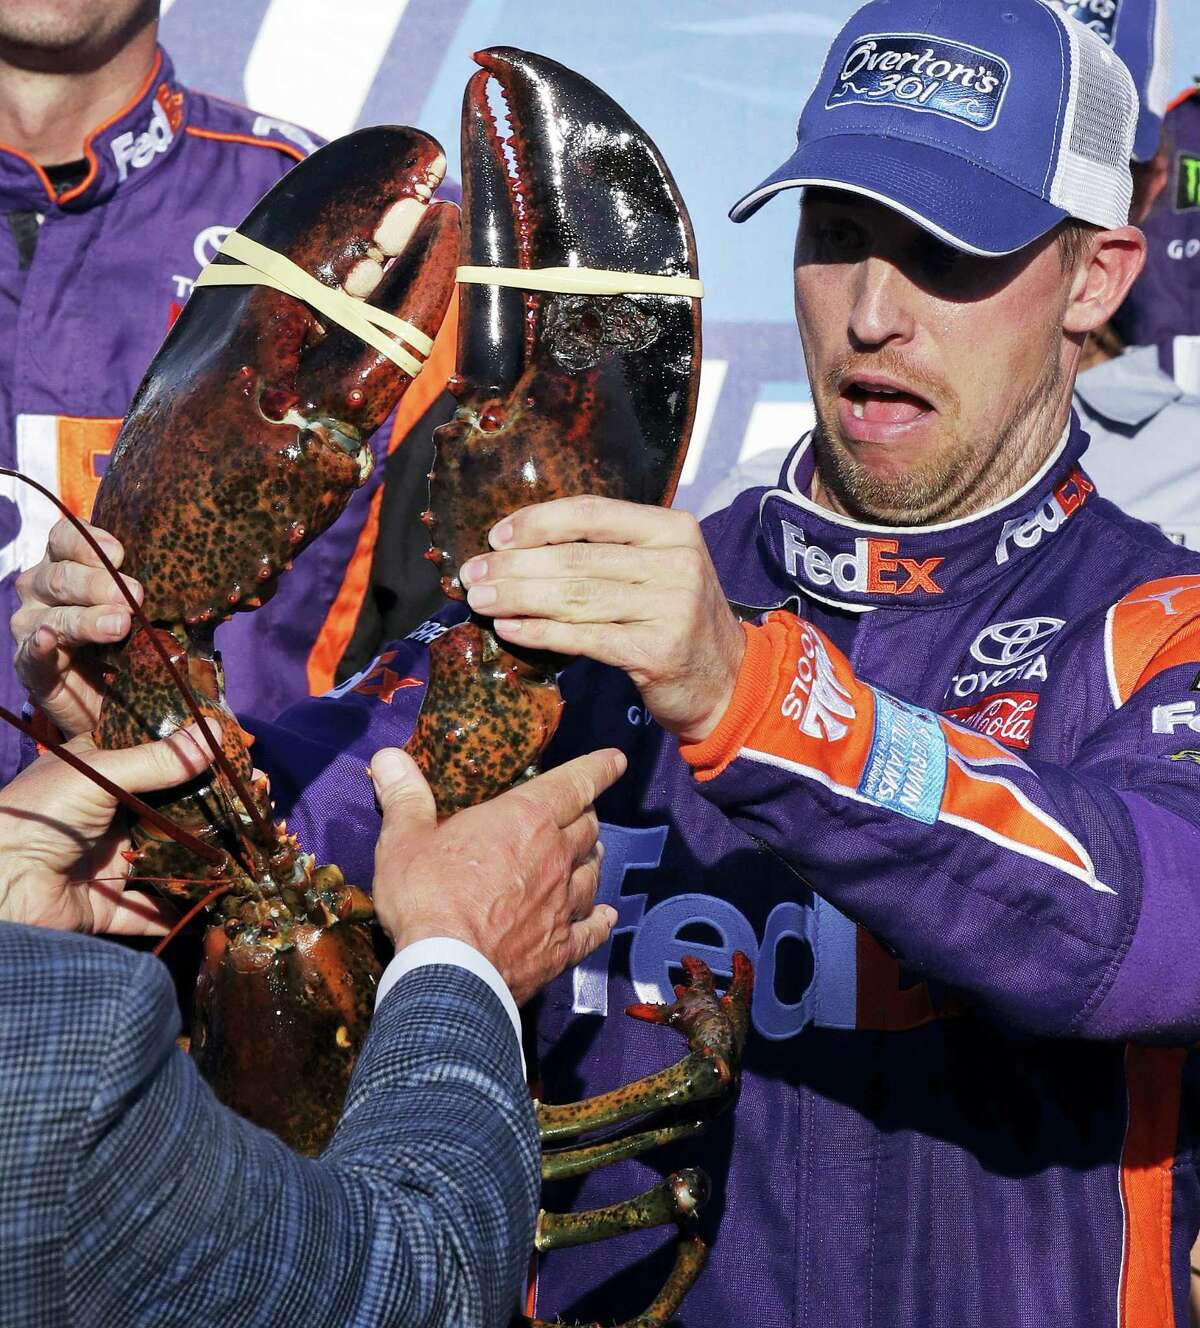 Driver Denny Hamlin reacts as he is handed a lobster after winning at the New Hampshire Motor Speedway in Loudon, N.H., on Sunday.